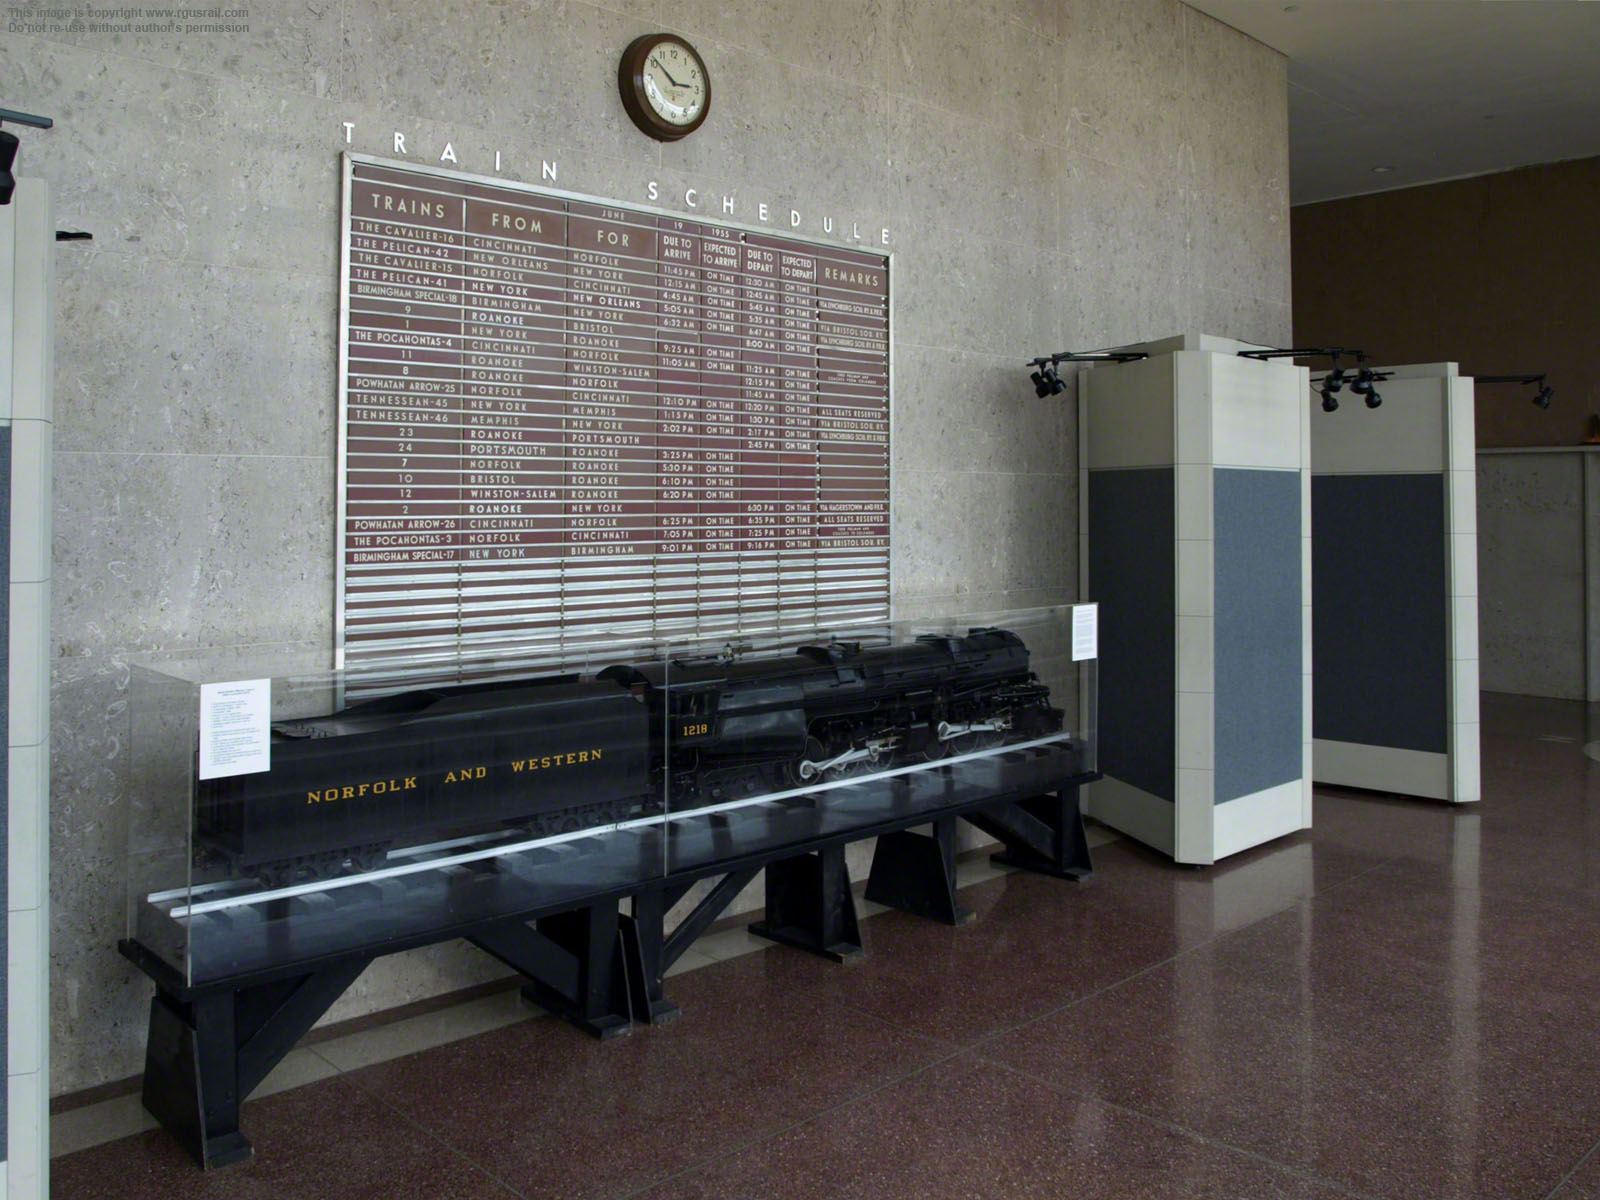 The train schedule board above the model has been set to 3rd June 1956 